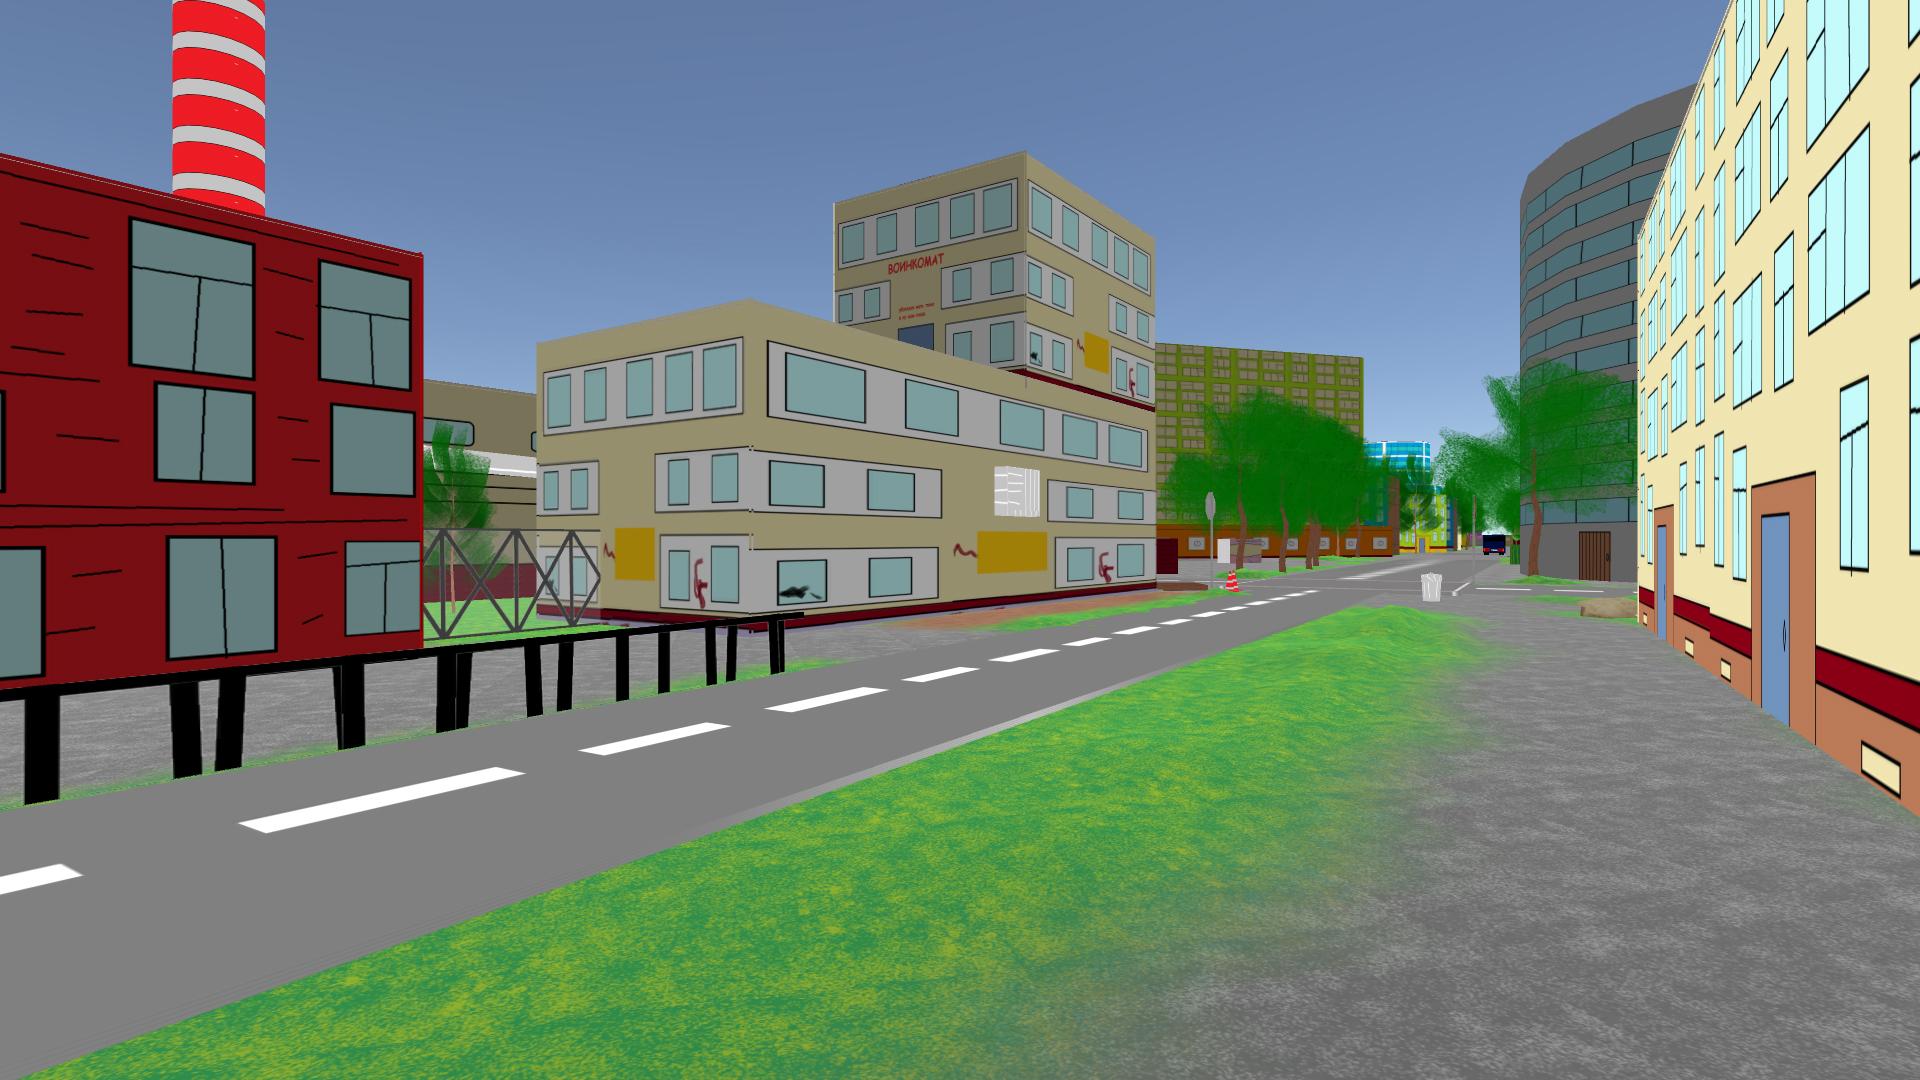 Screenshot №6 from game VCB: Why City (Beta Version)